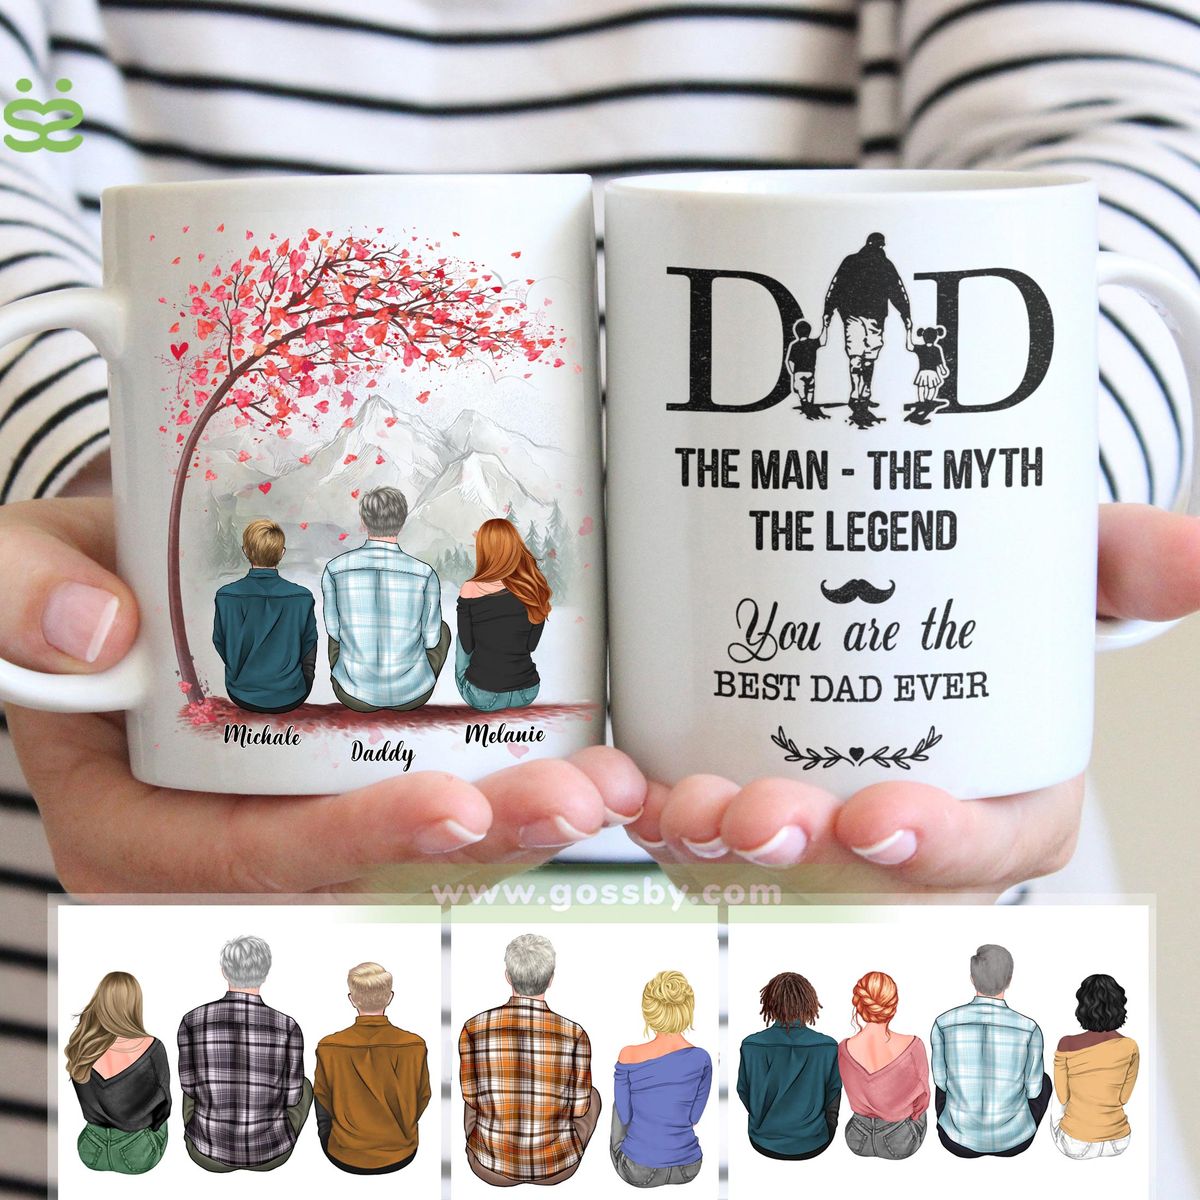 Dad & Children - Dad, The Man The Myth The Legend. You are the best Dad ever 2 - Mugs 1D1S - Personalized Mug